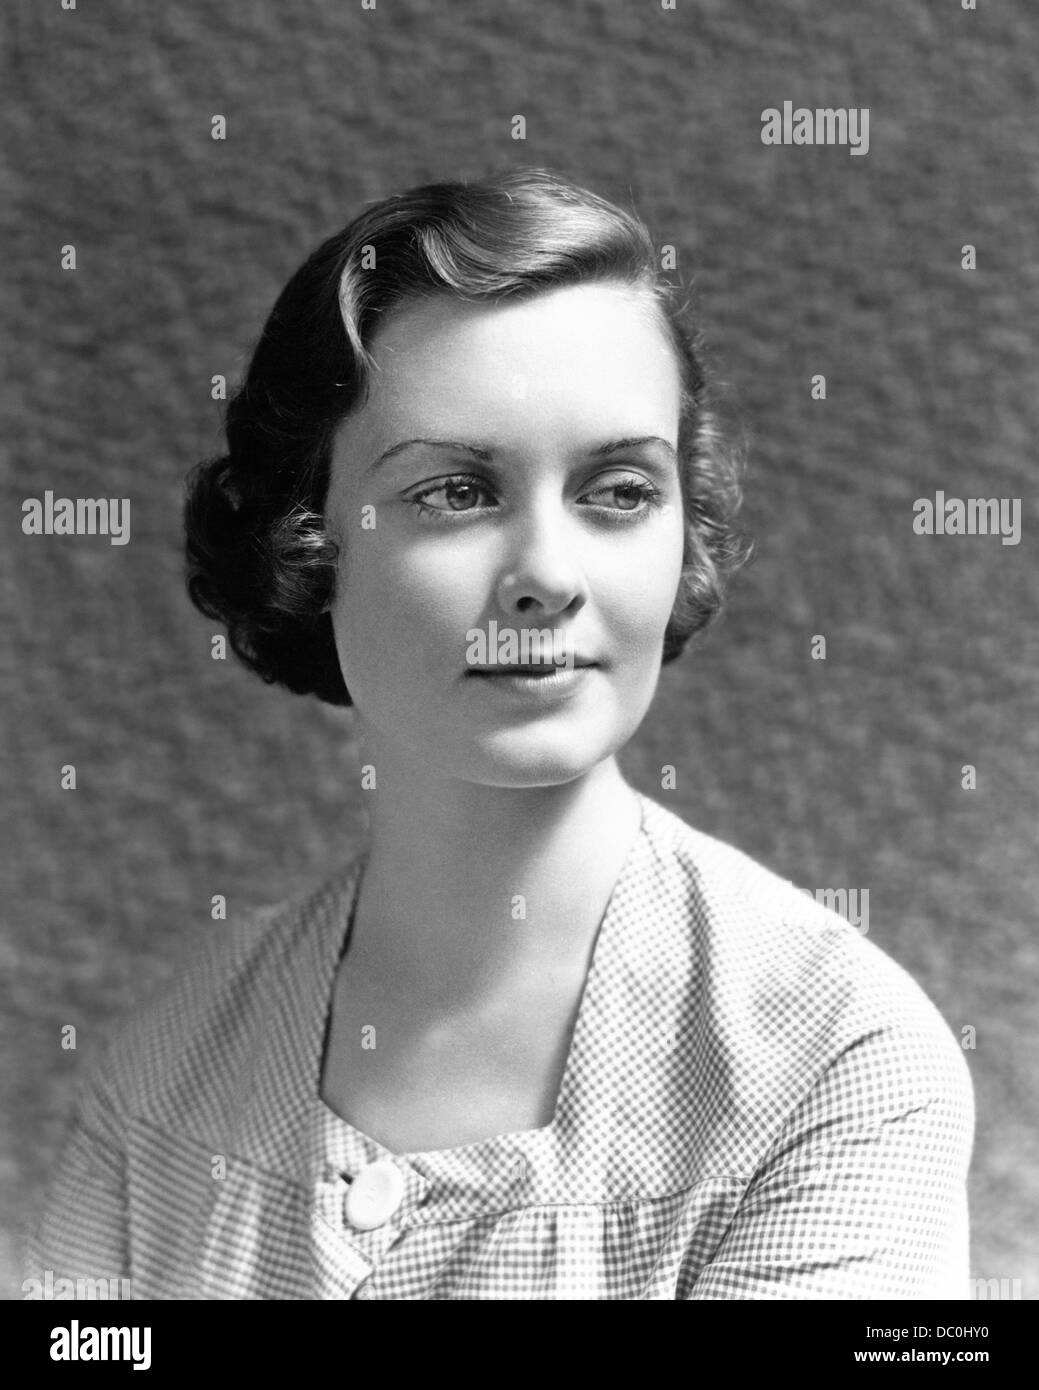 1930s 1940s PORTRAIT WOMAN CHECKED DRESS WITH SUBTLE MONA LISA LIKE SMILE Stock Photo